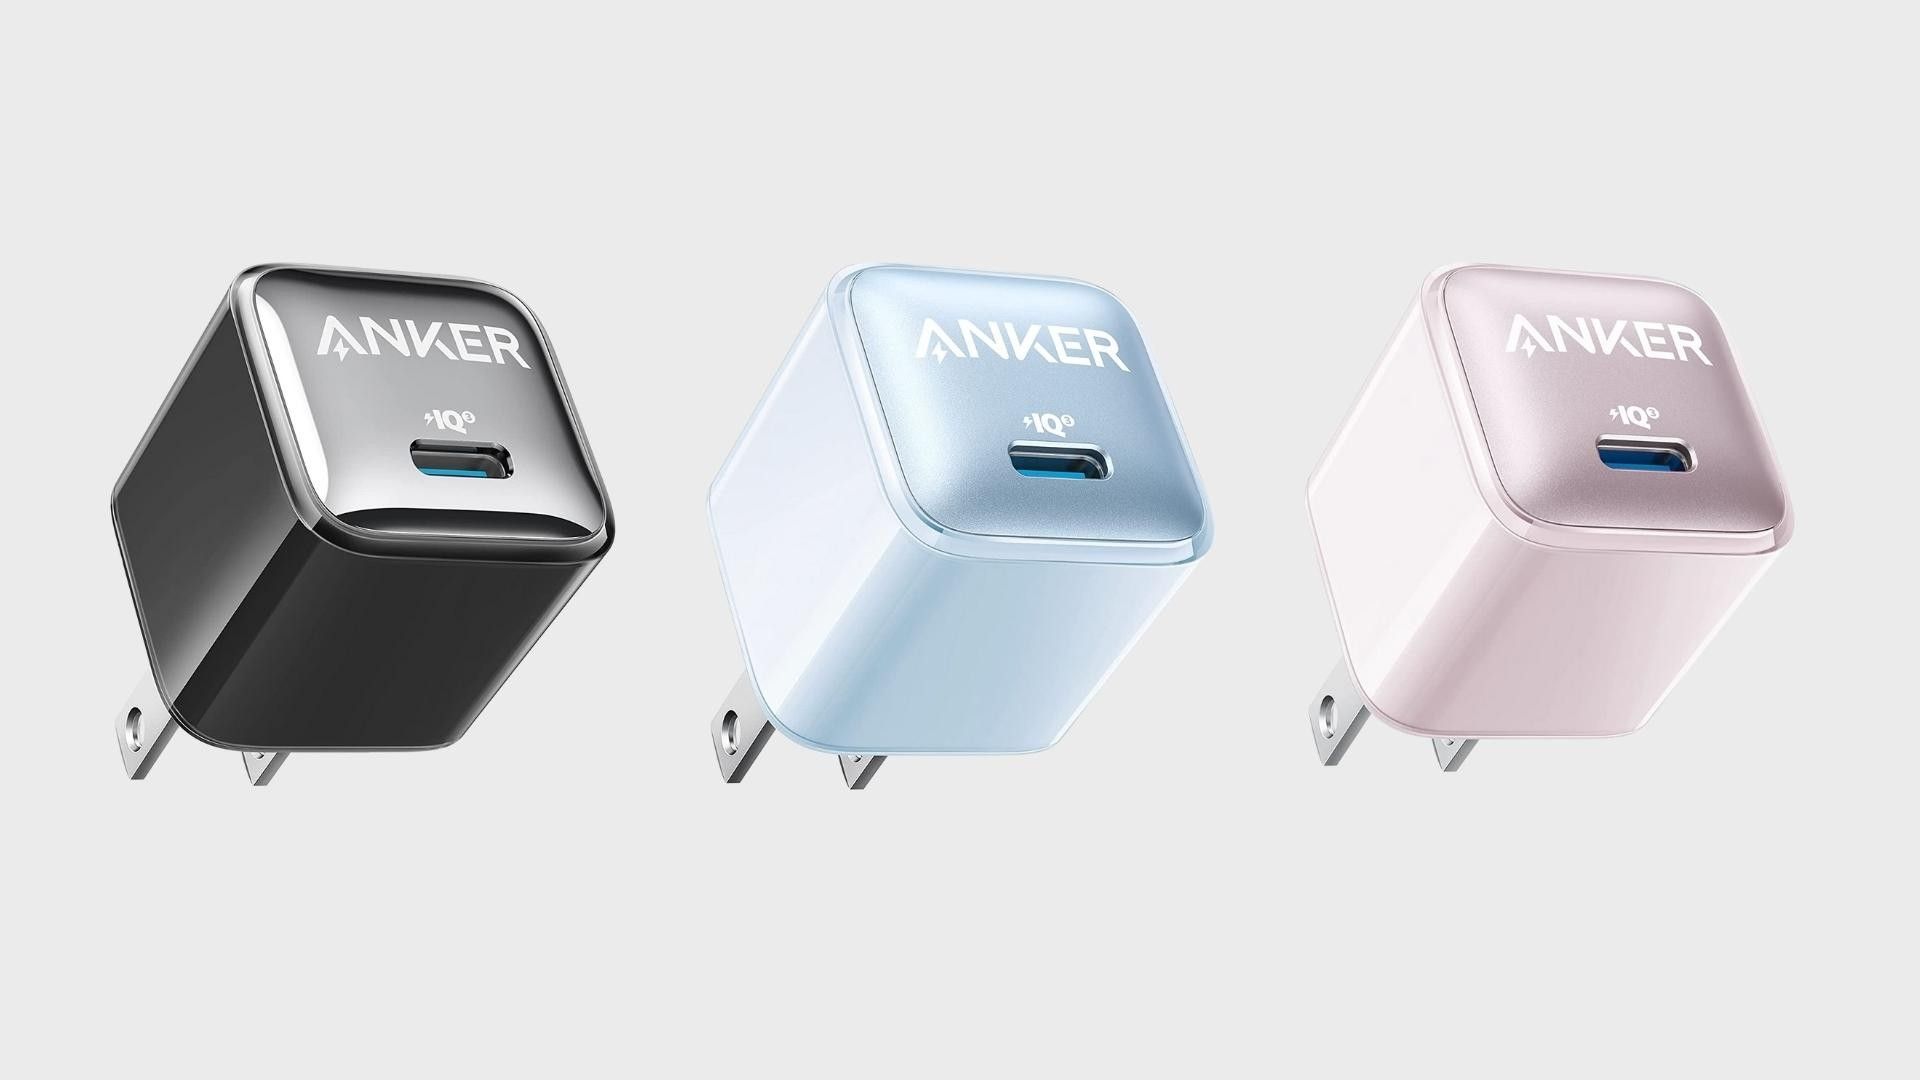 Anker Nano Pro 20W and three of its available colors, Grey, Light Blue, and Pink